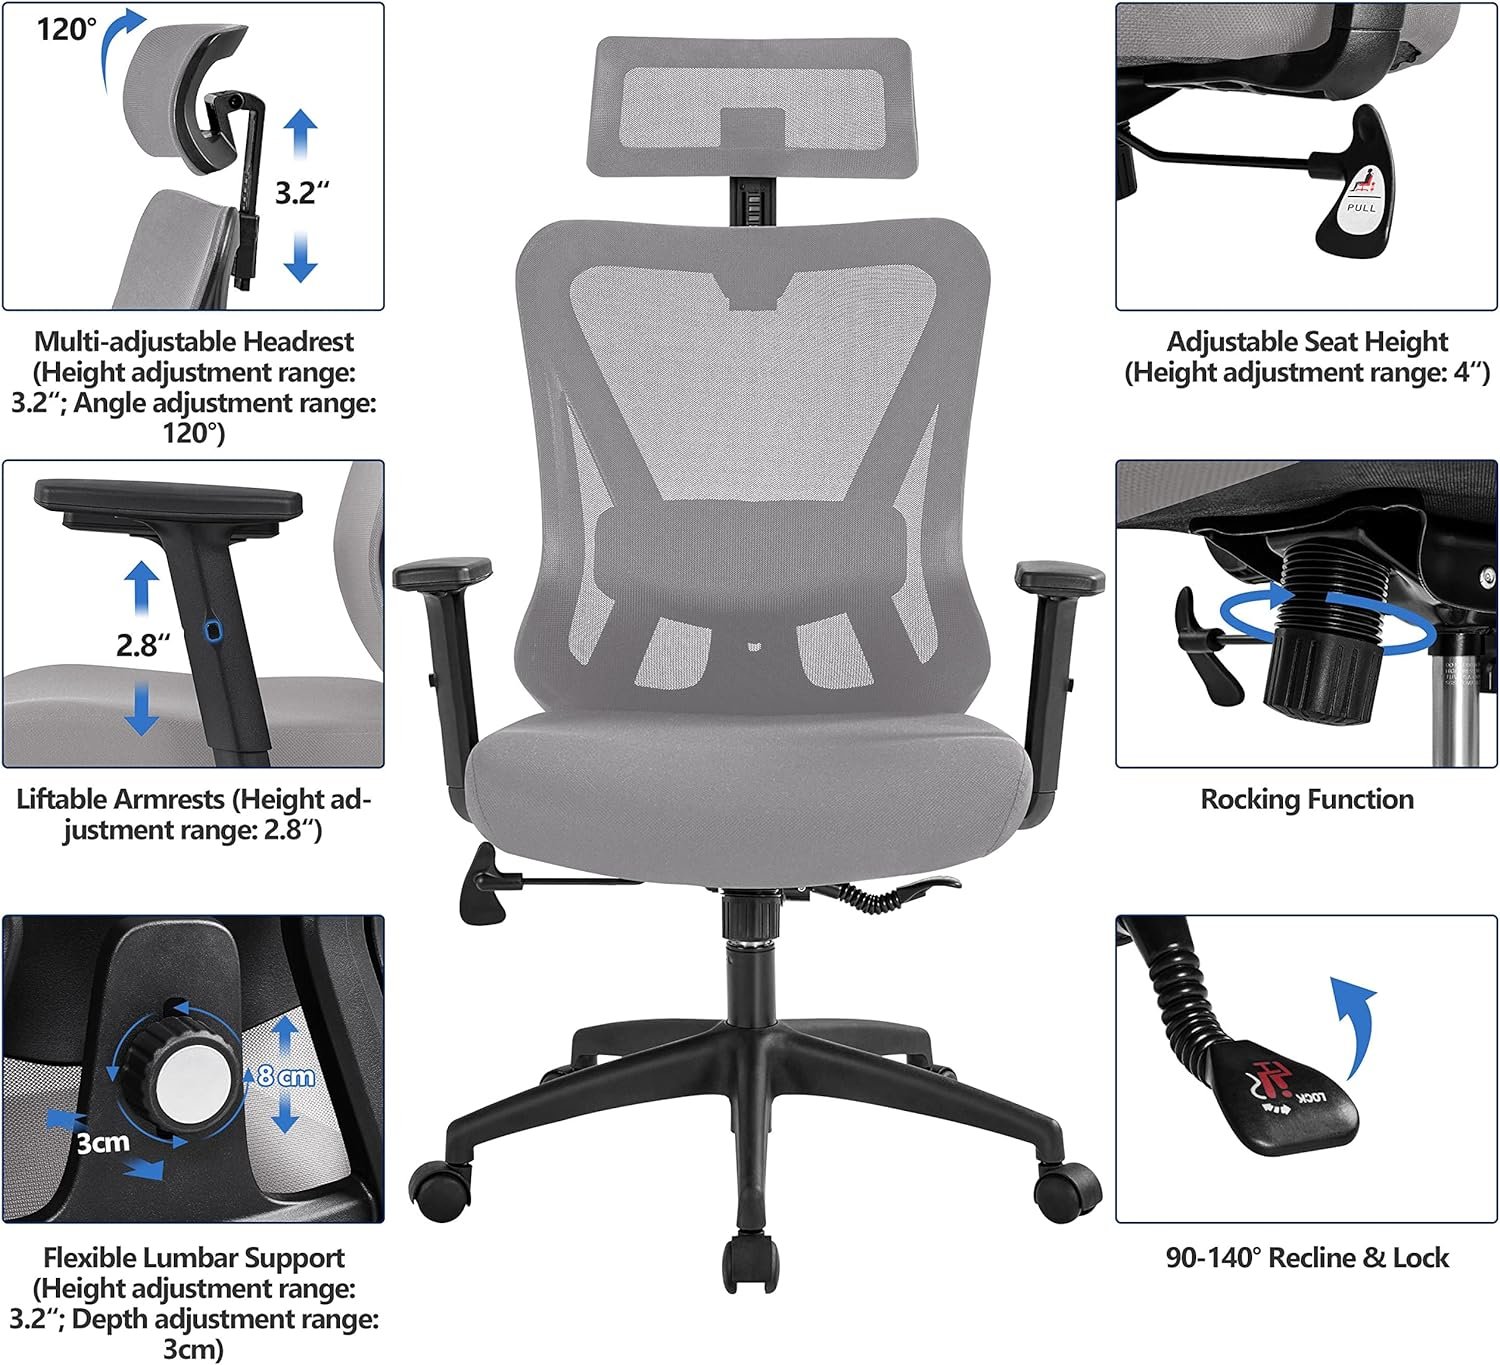 Yaheetech Ergonomic Office Chair Desk Chair High Back Mesh Computer Chair Study Chair with Lumbar Support Adjustable Armrest, Backrest and Headrest for Home Office Working Black